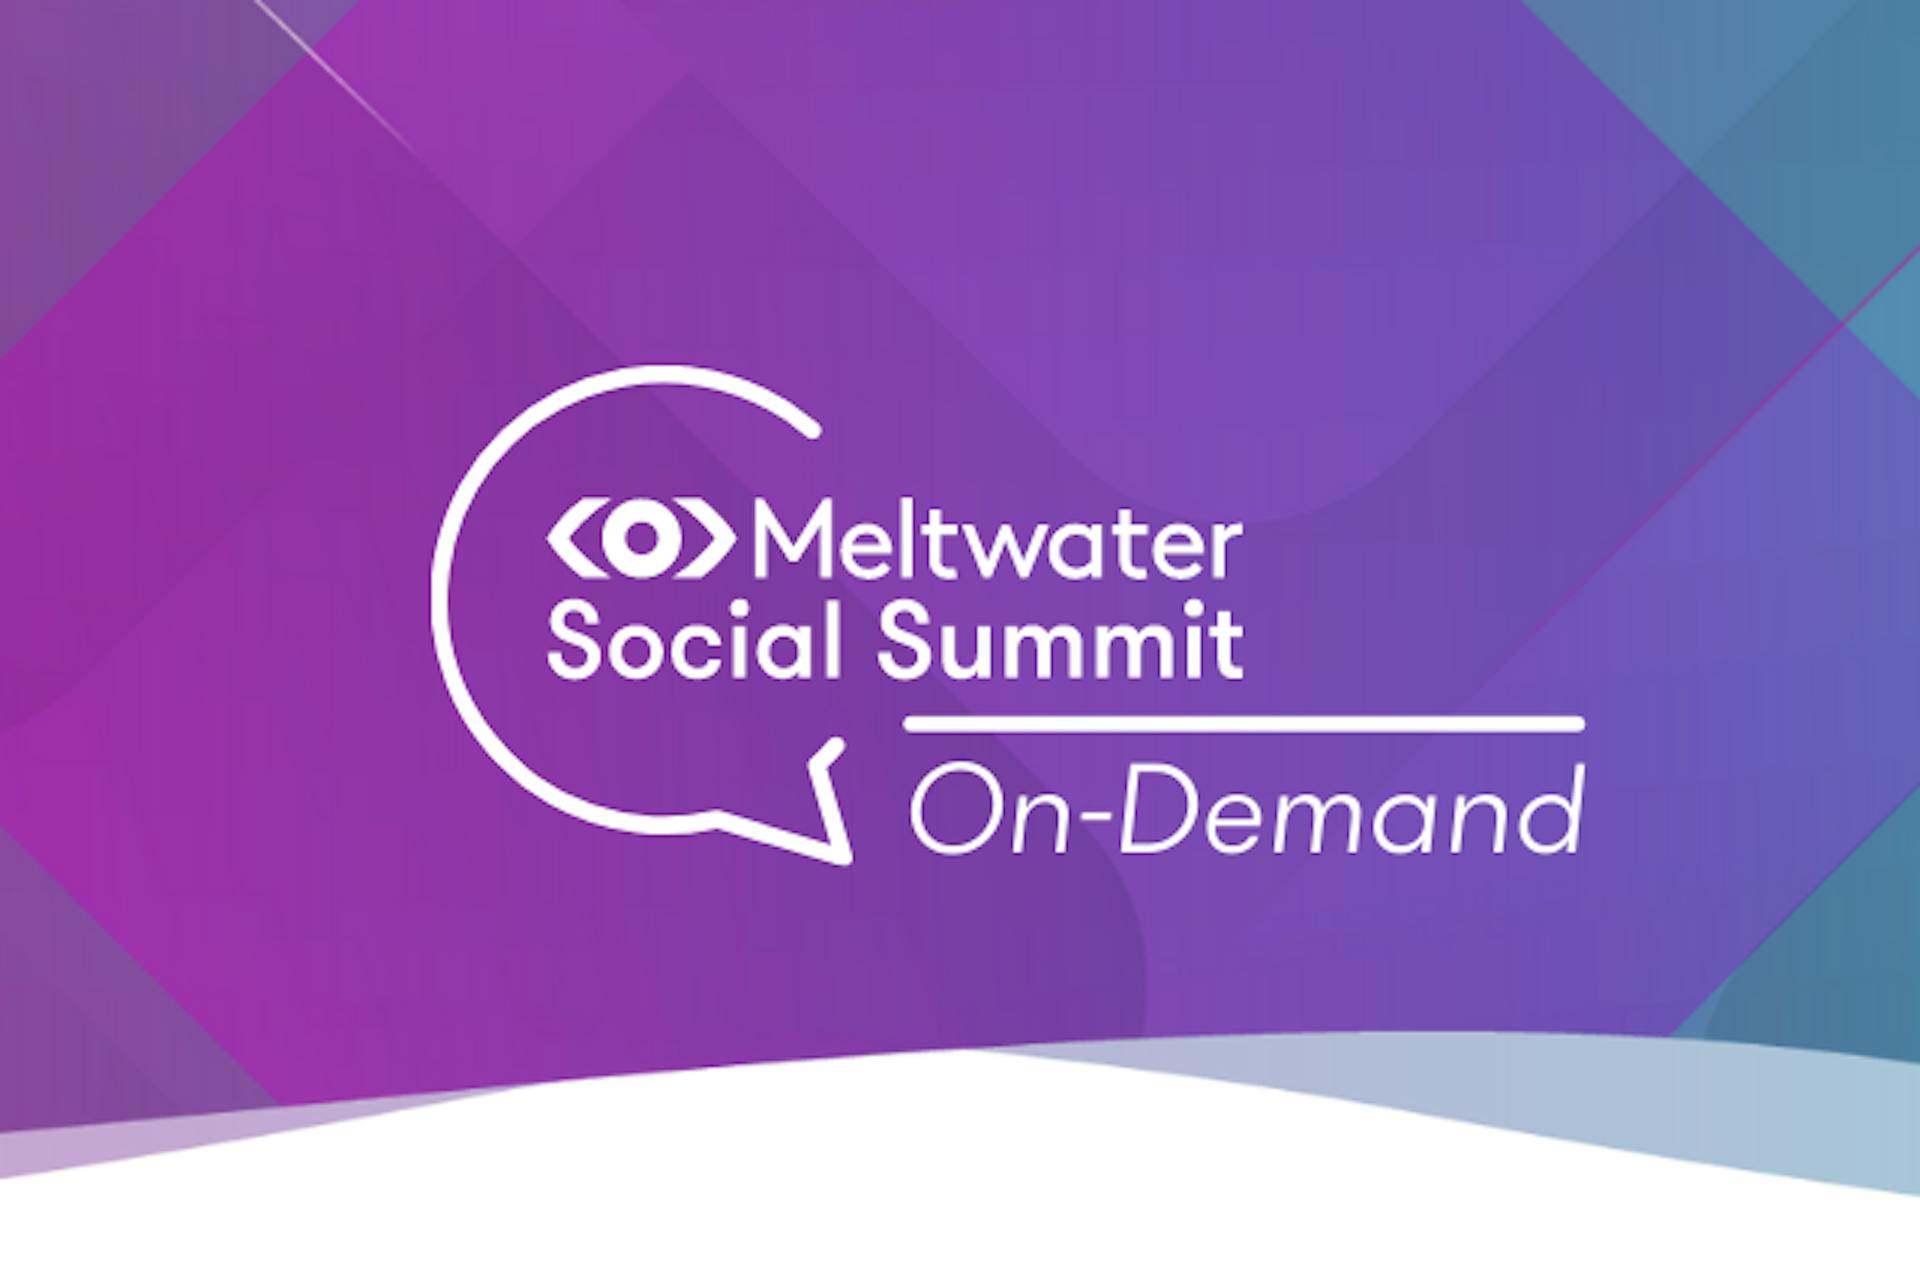 Meltwater Social Summit On-Demand